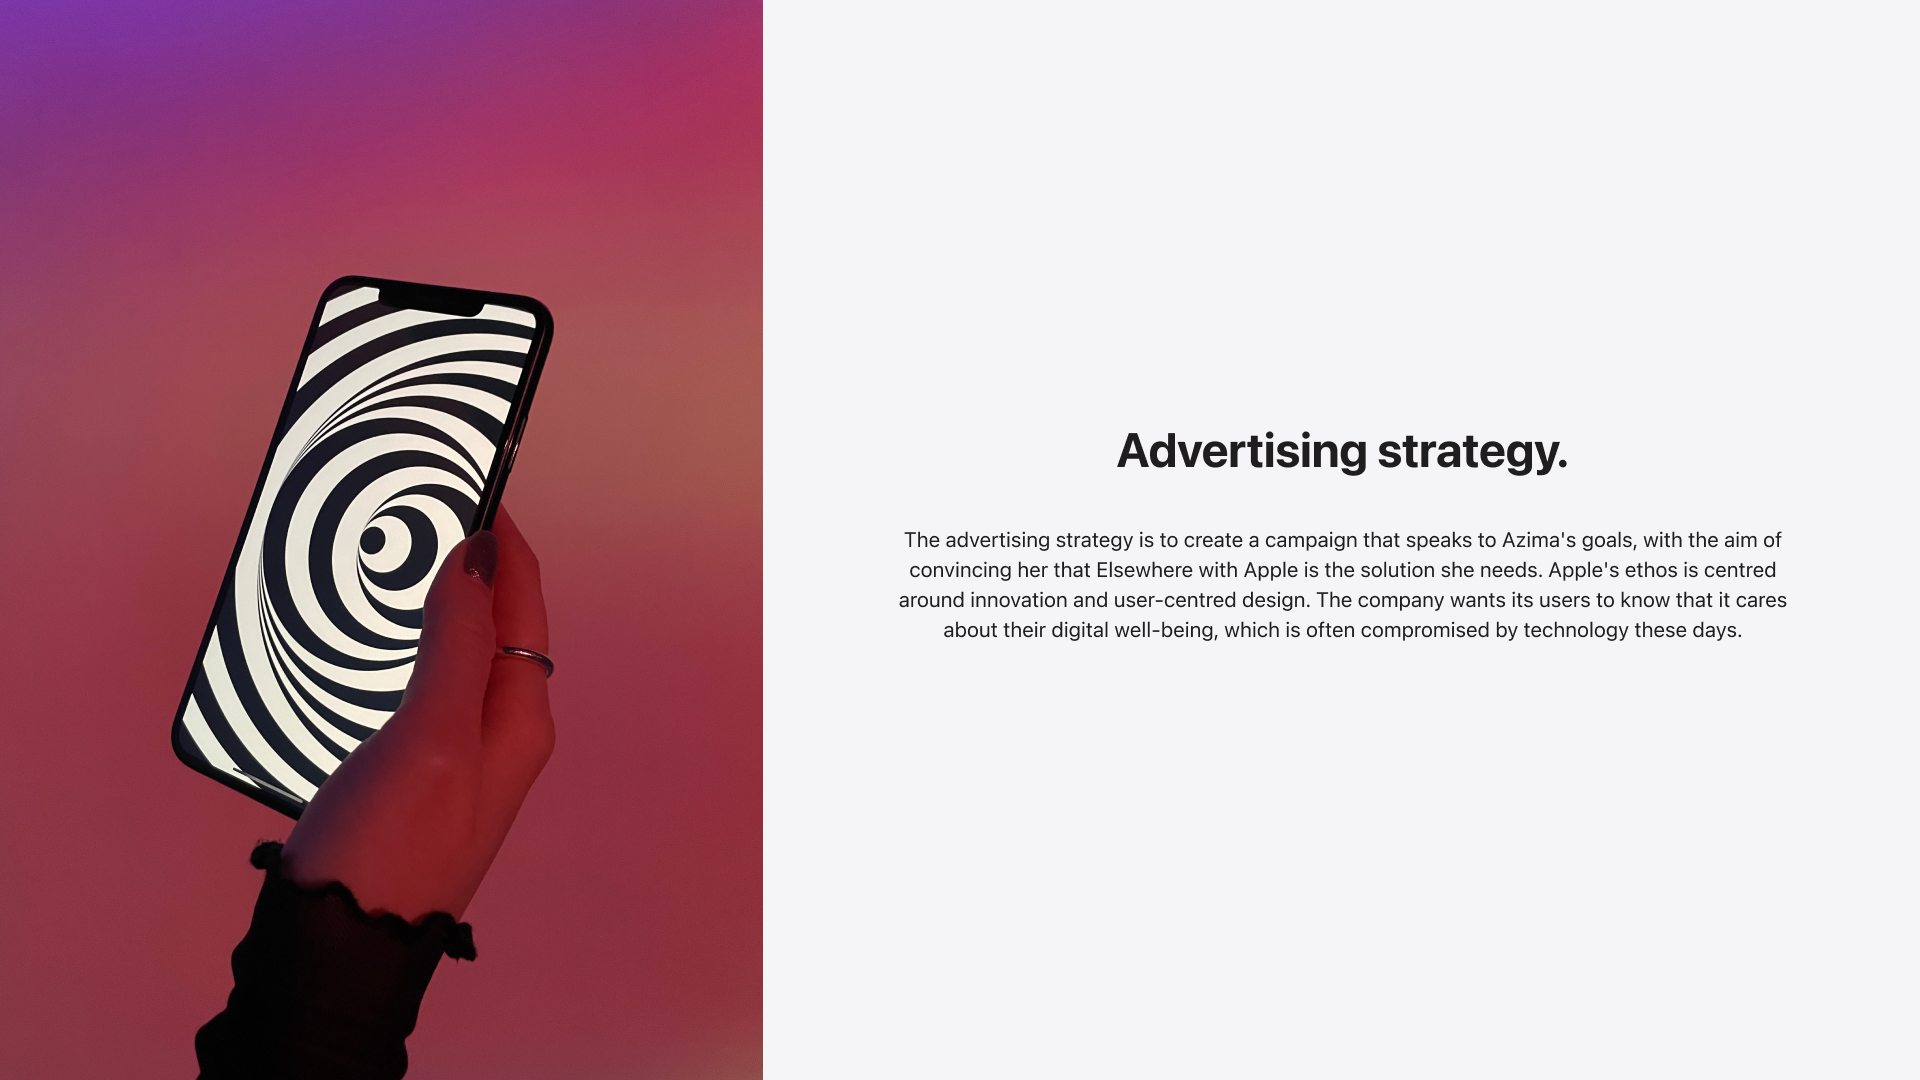 Advertising strategy overview.